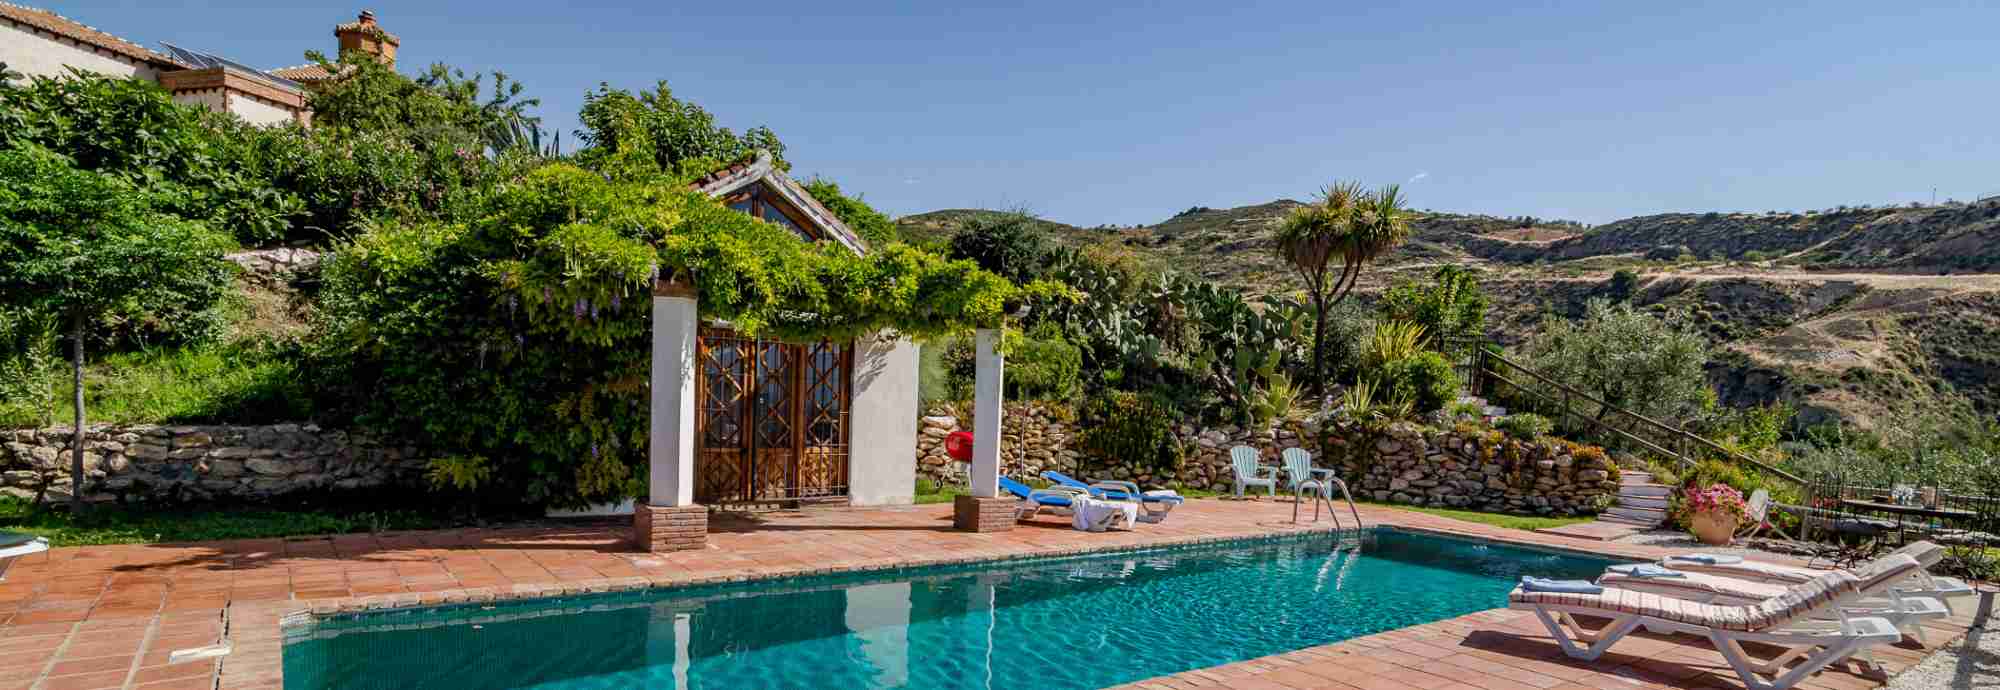 Fascinating Finca with sprawling gardens caught between the mountains and the sea